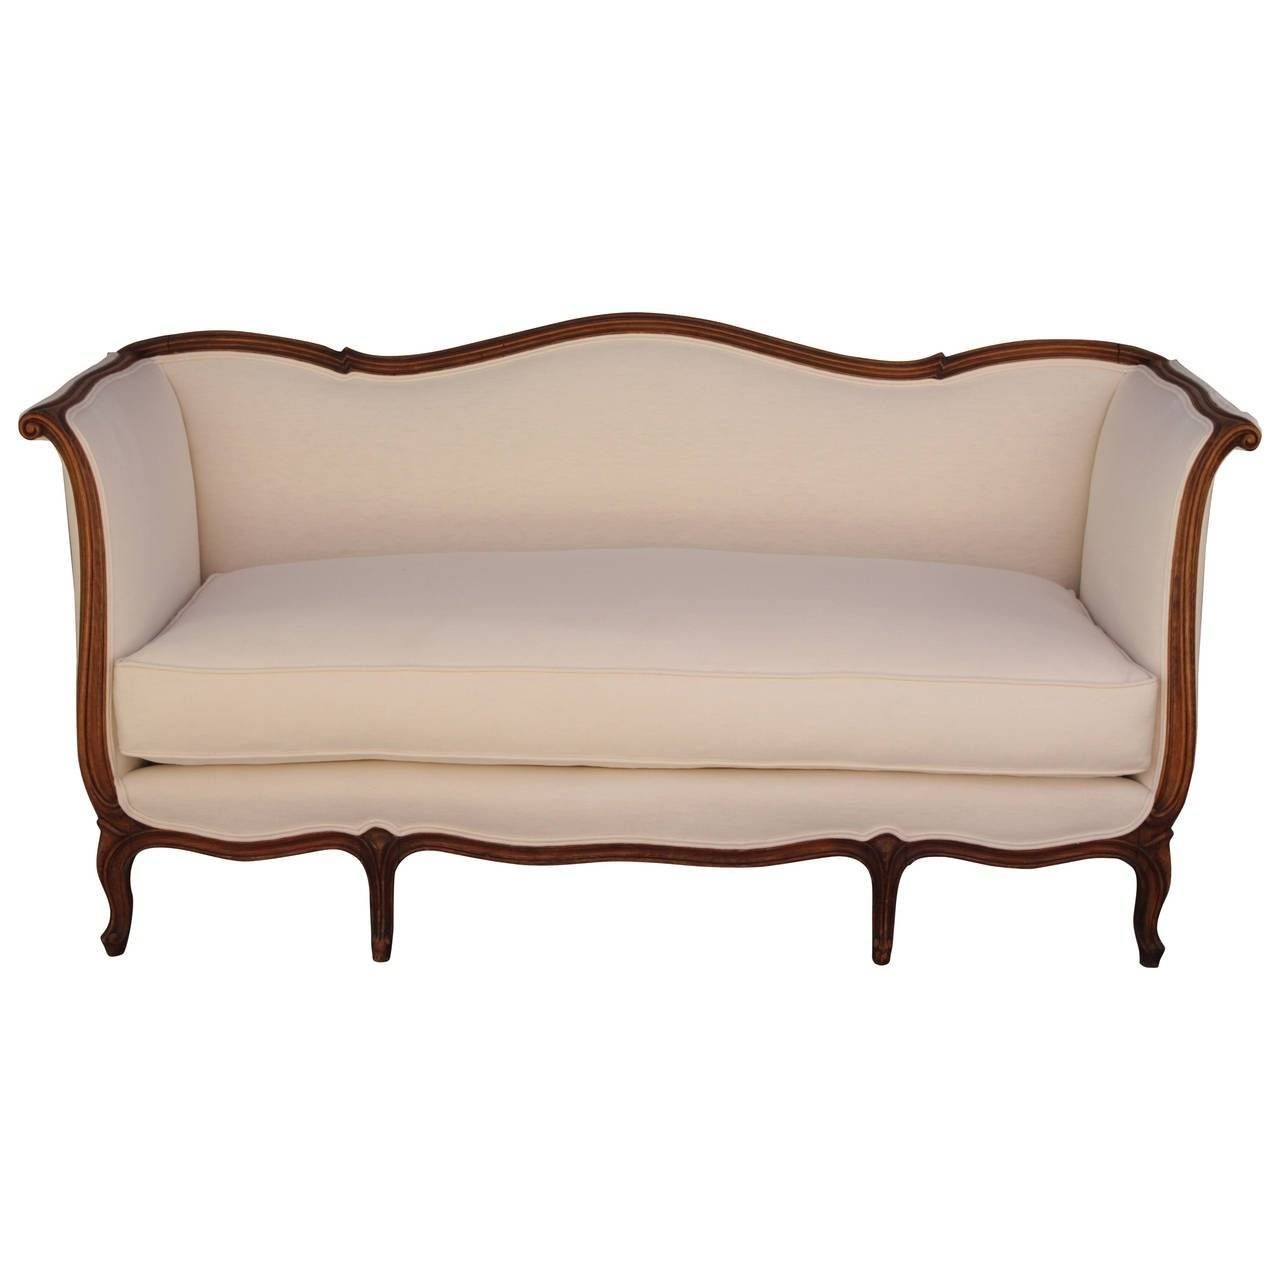 French Louis Xv Style Sofa With Linen Upholstery At 1stdibs Regarding French Style Sofa (View 2 of 25)